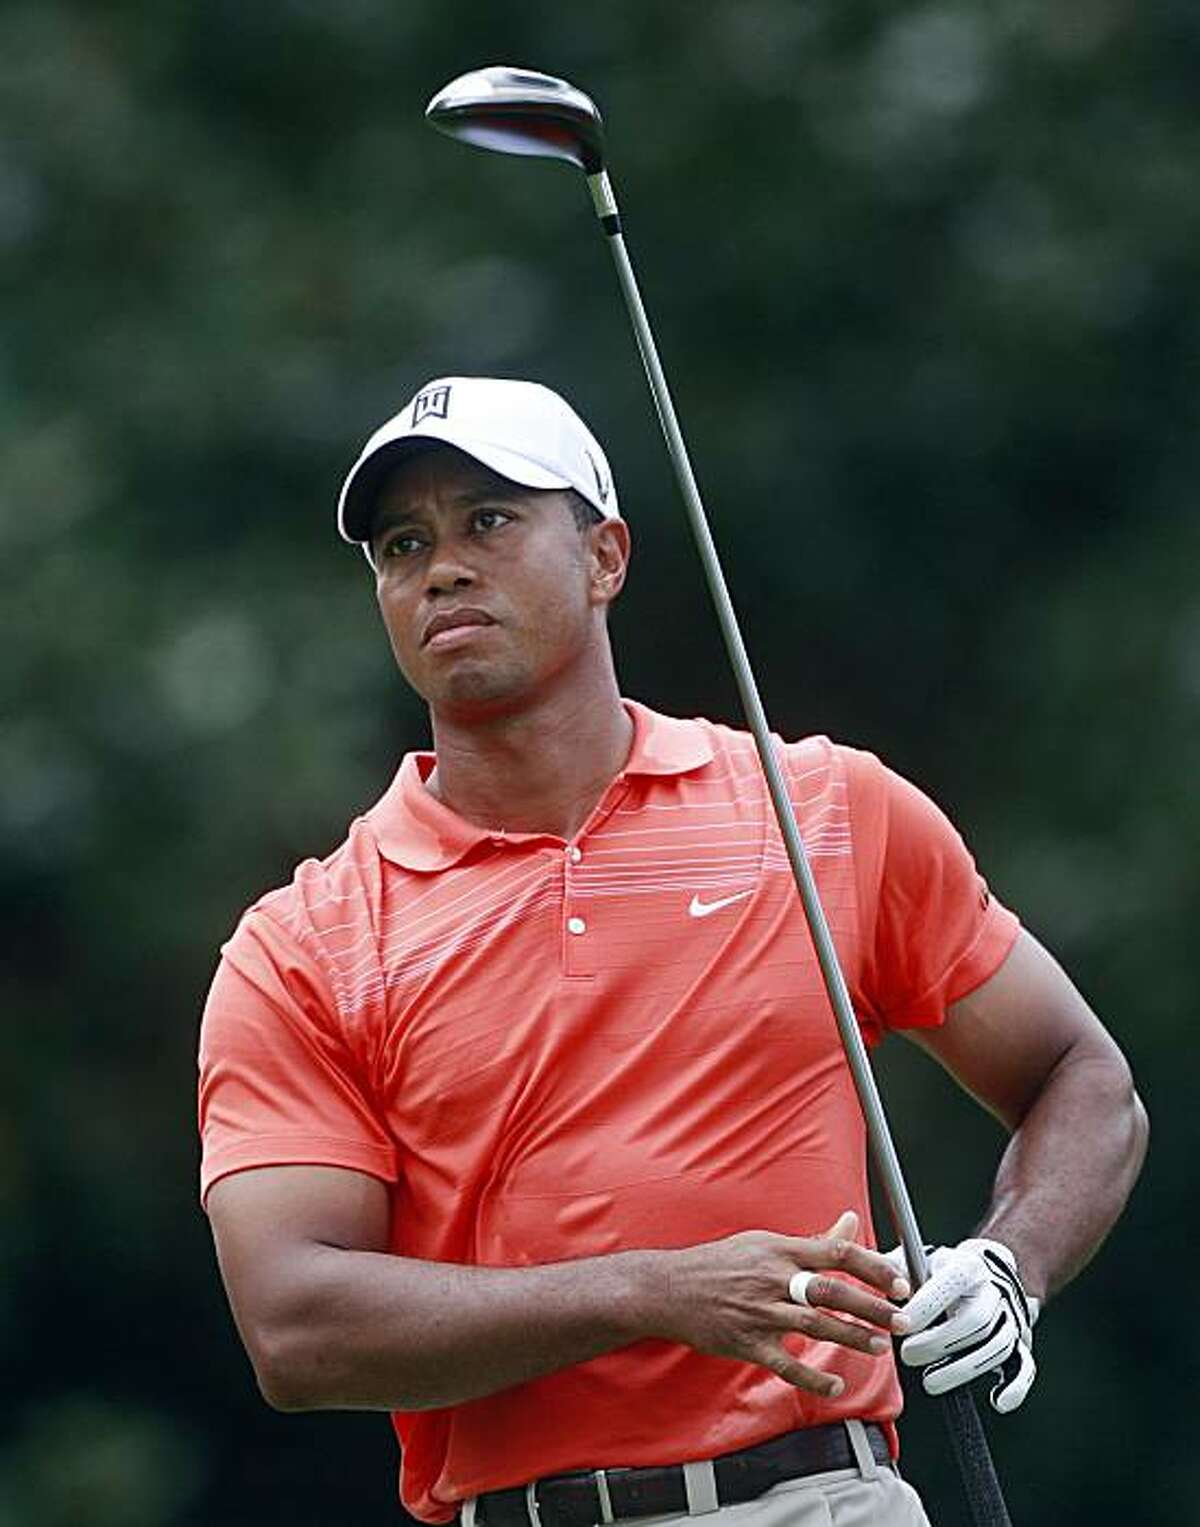 FILE - This Sept. 25, 2009, file photo shows Tiger Woods watching his tee shot on the fifth hole during the second round of the Tour Championship golf tournament at the East Lake Golf Club in Atlanta. Woods is back at home after a week of family counseling in Arizona and is trying to get back into a routine that includes golf and fitness, according to a person with knowledge of his schedule.